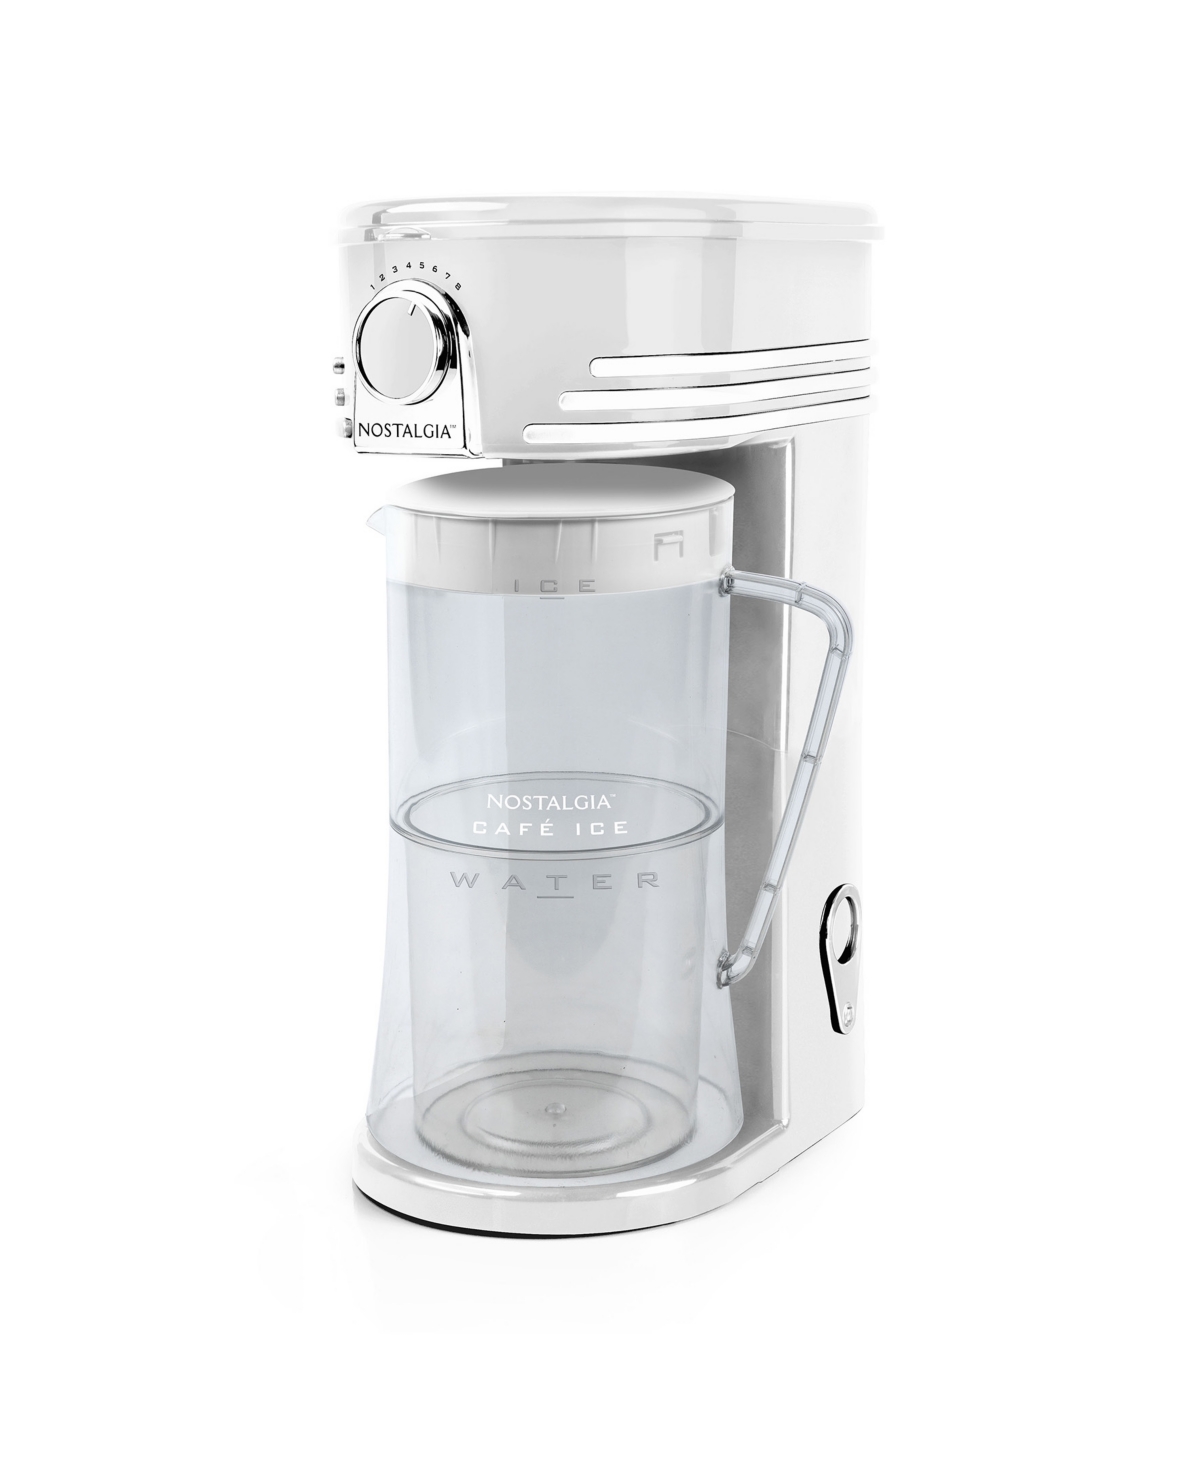 Nostalgia Cafe Ice 3 Quart Iced Coffee And Tea Brewing System With Plastic Pitcher In White